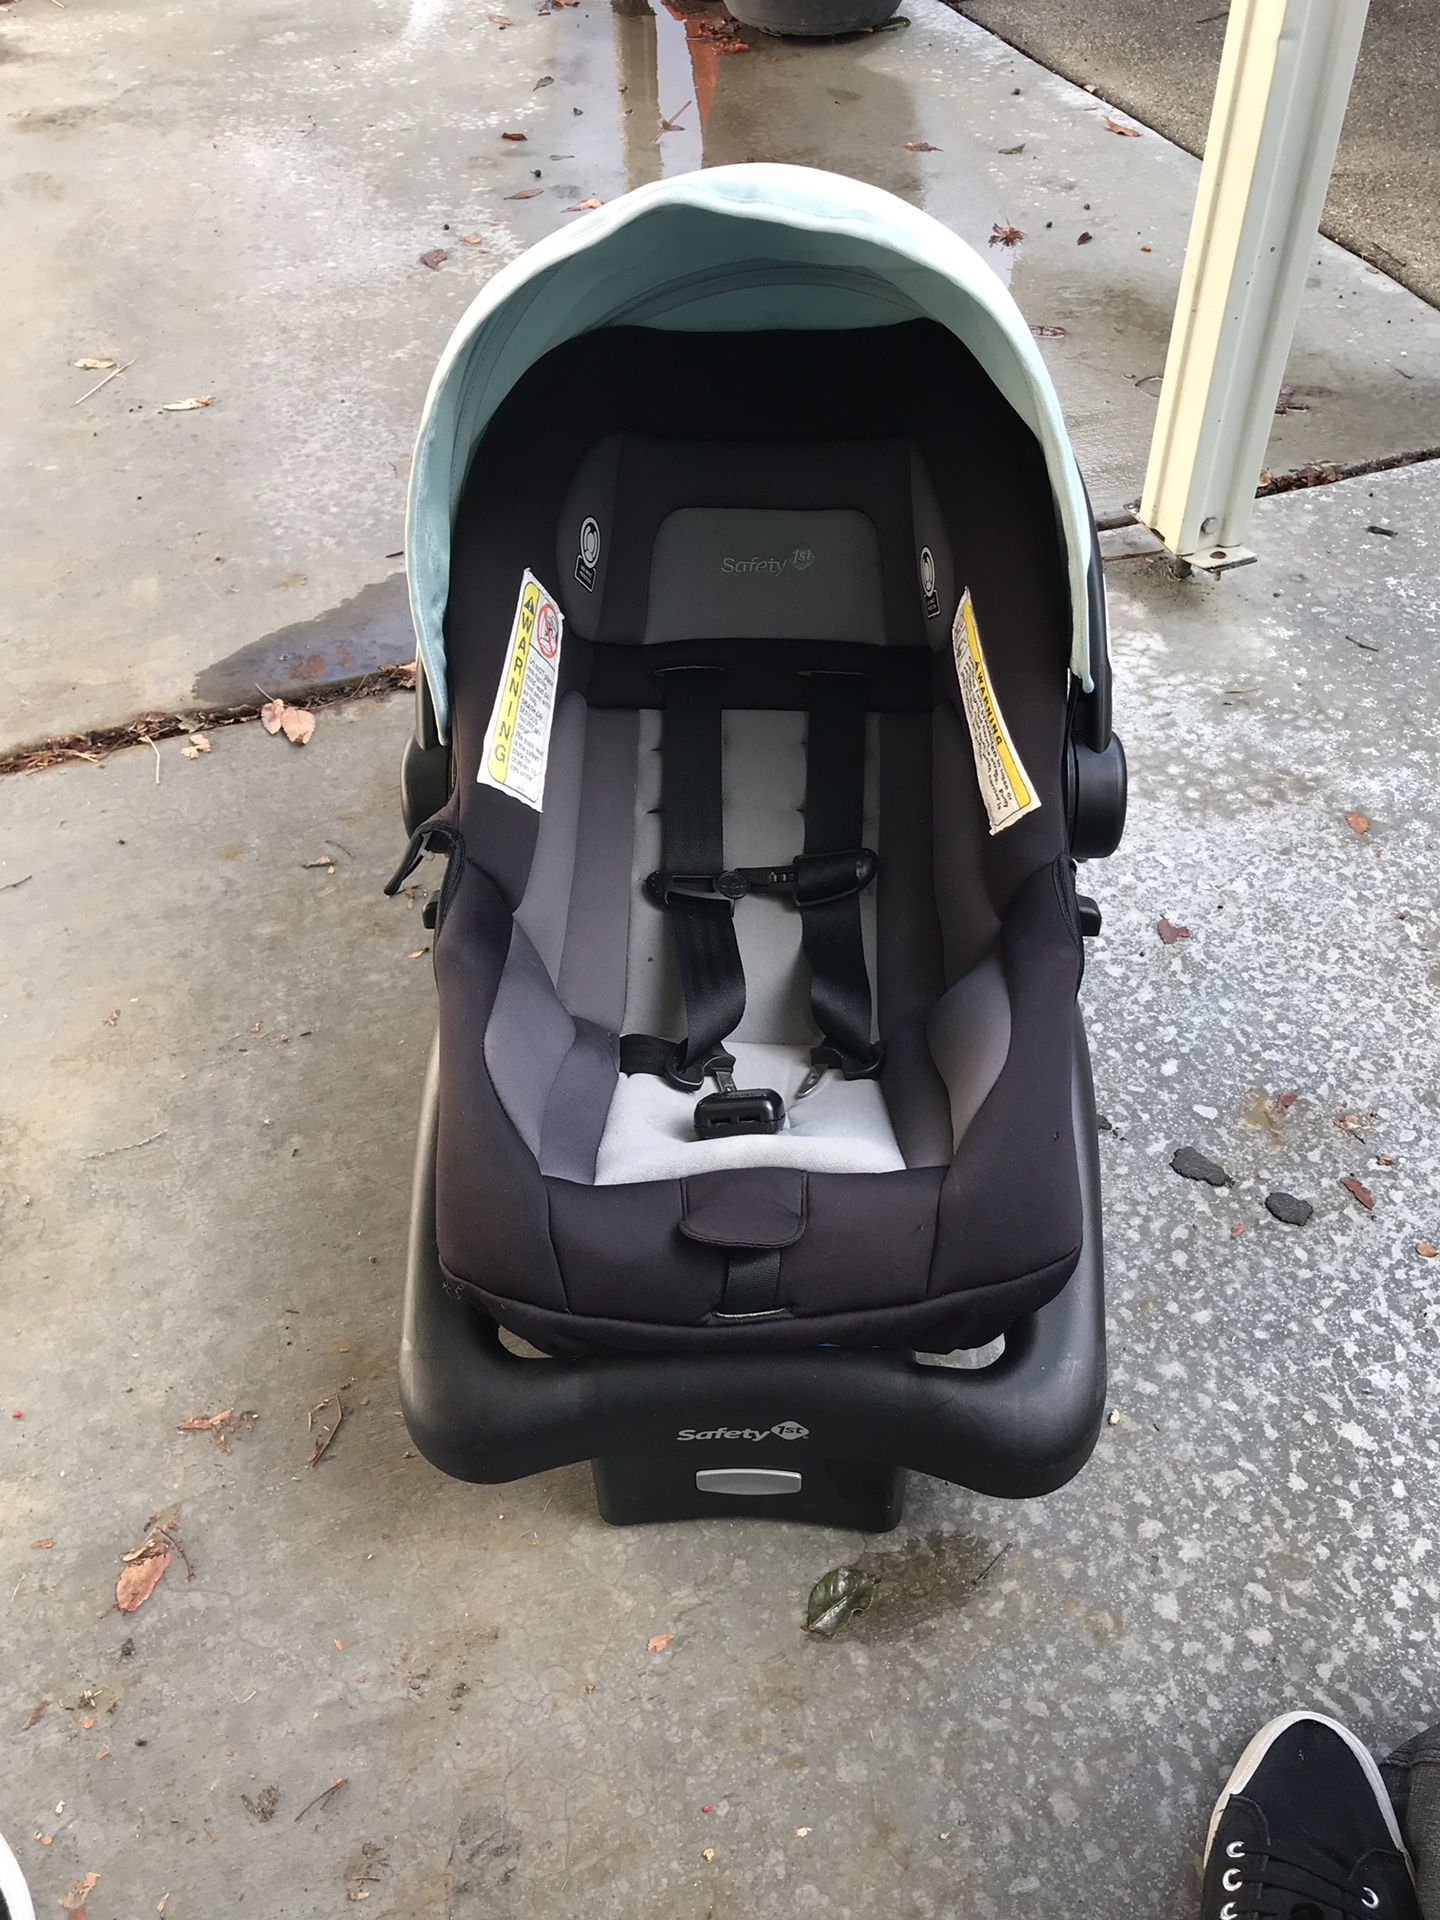 Safety 1st infant seat